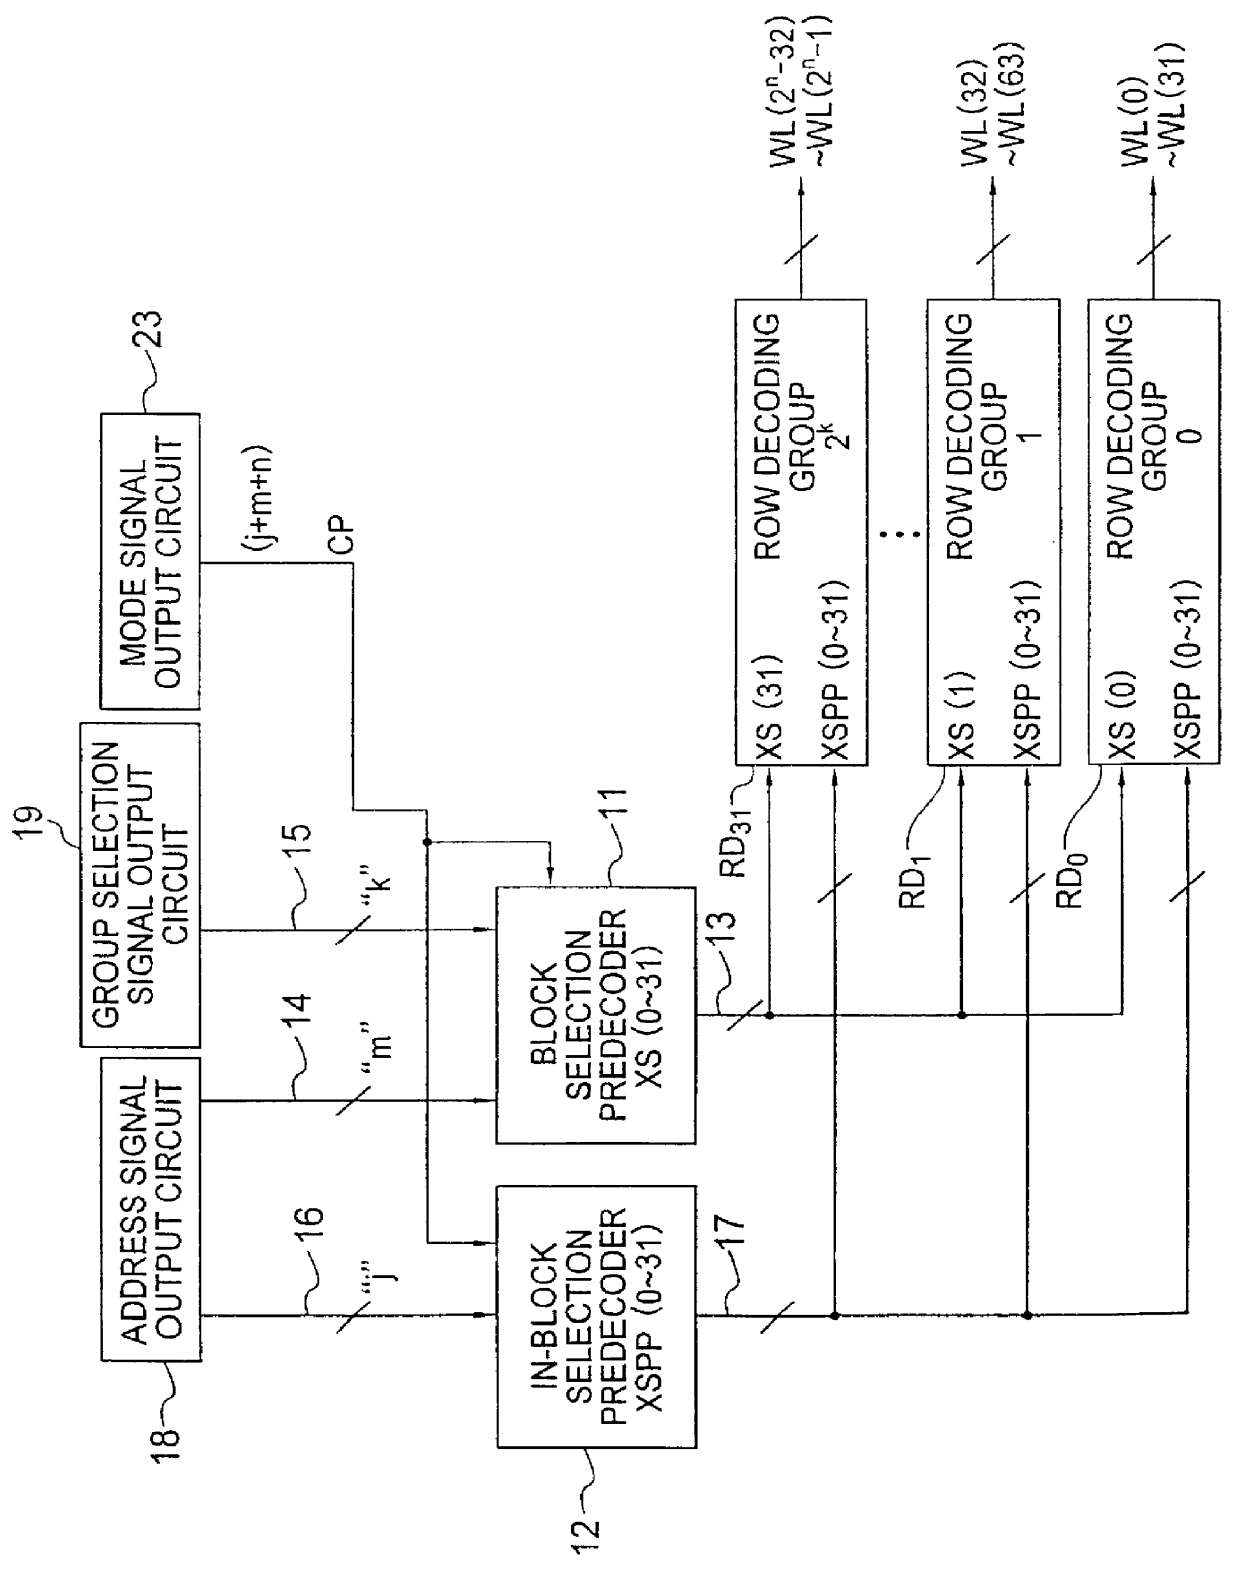 Non-volatile semiconductor memory device for selective cell flash erasing/programming